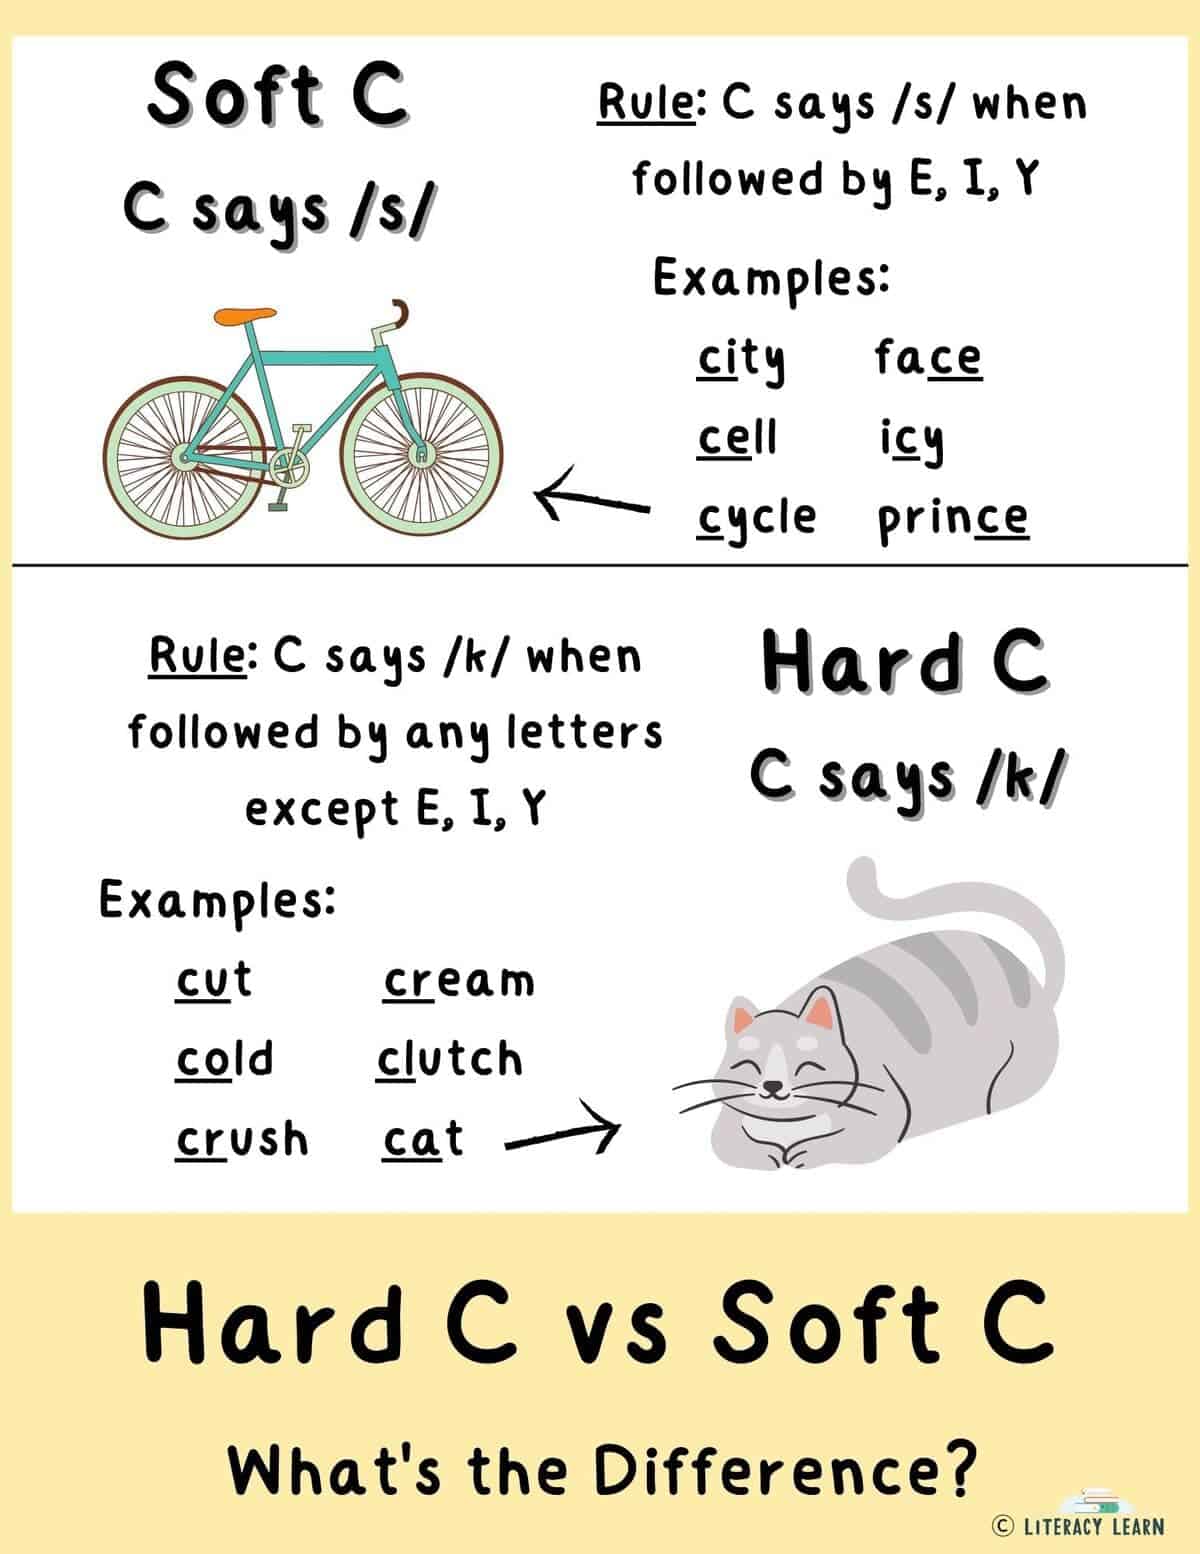 Visual with the difference between hard G and soft C with rules, pictures, and example words.